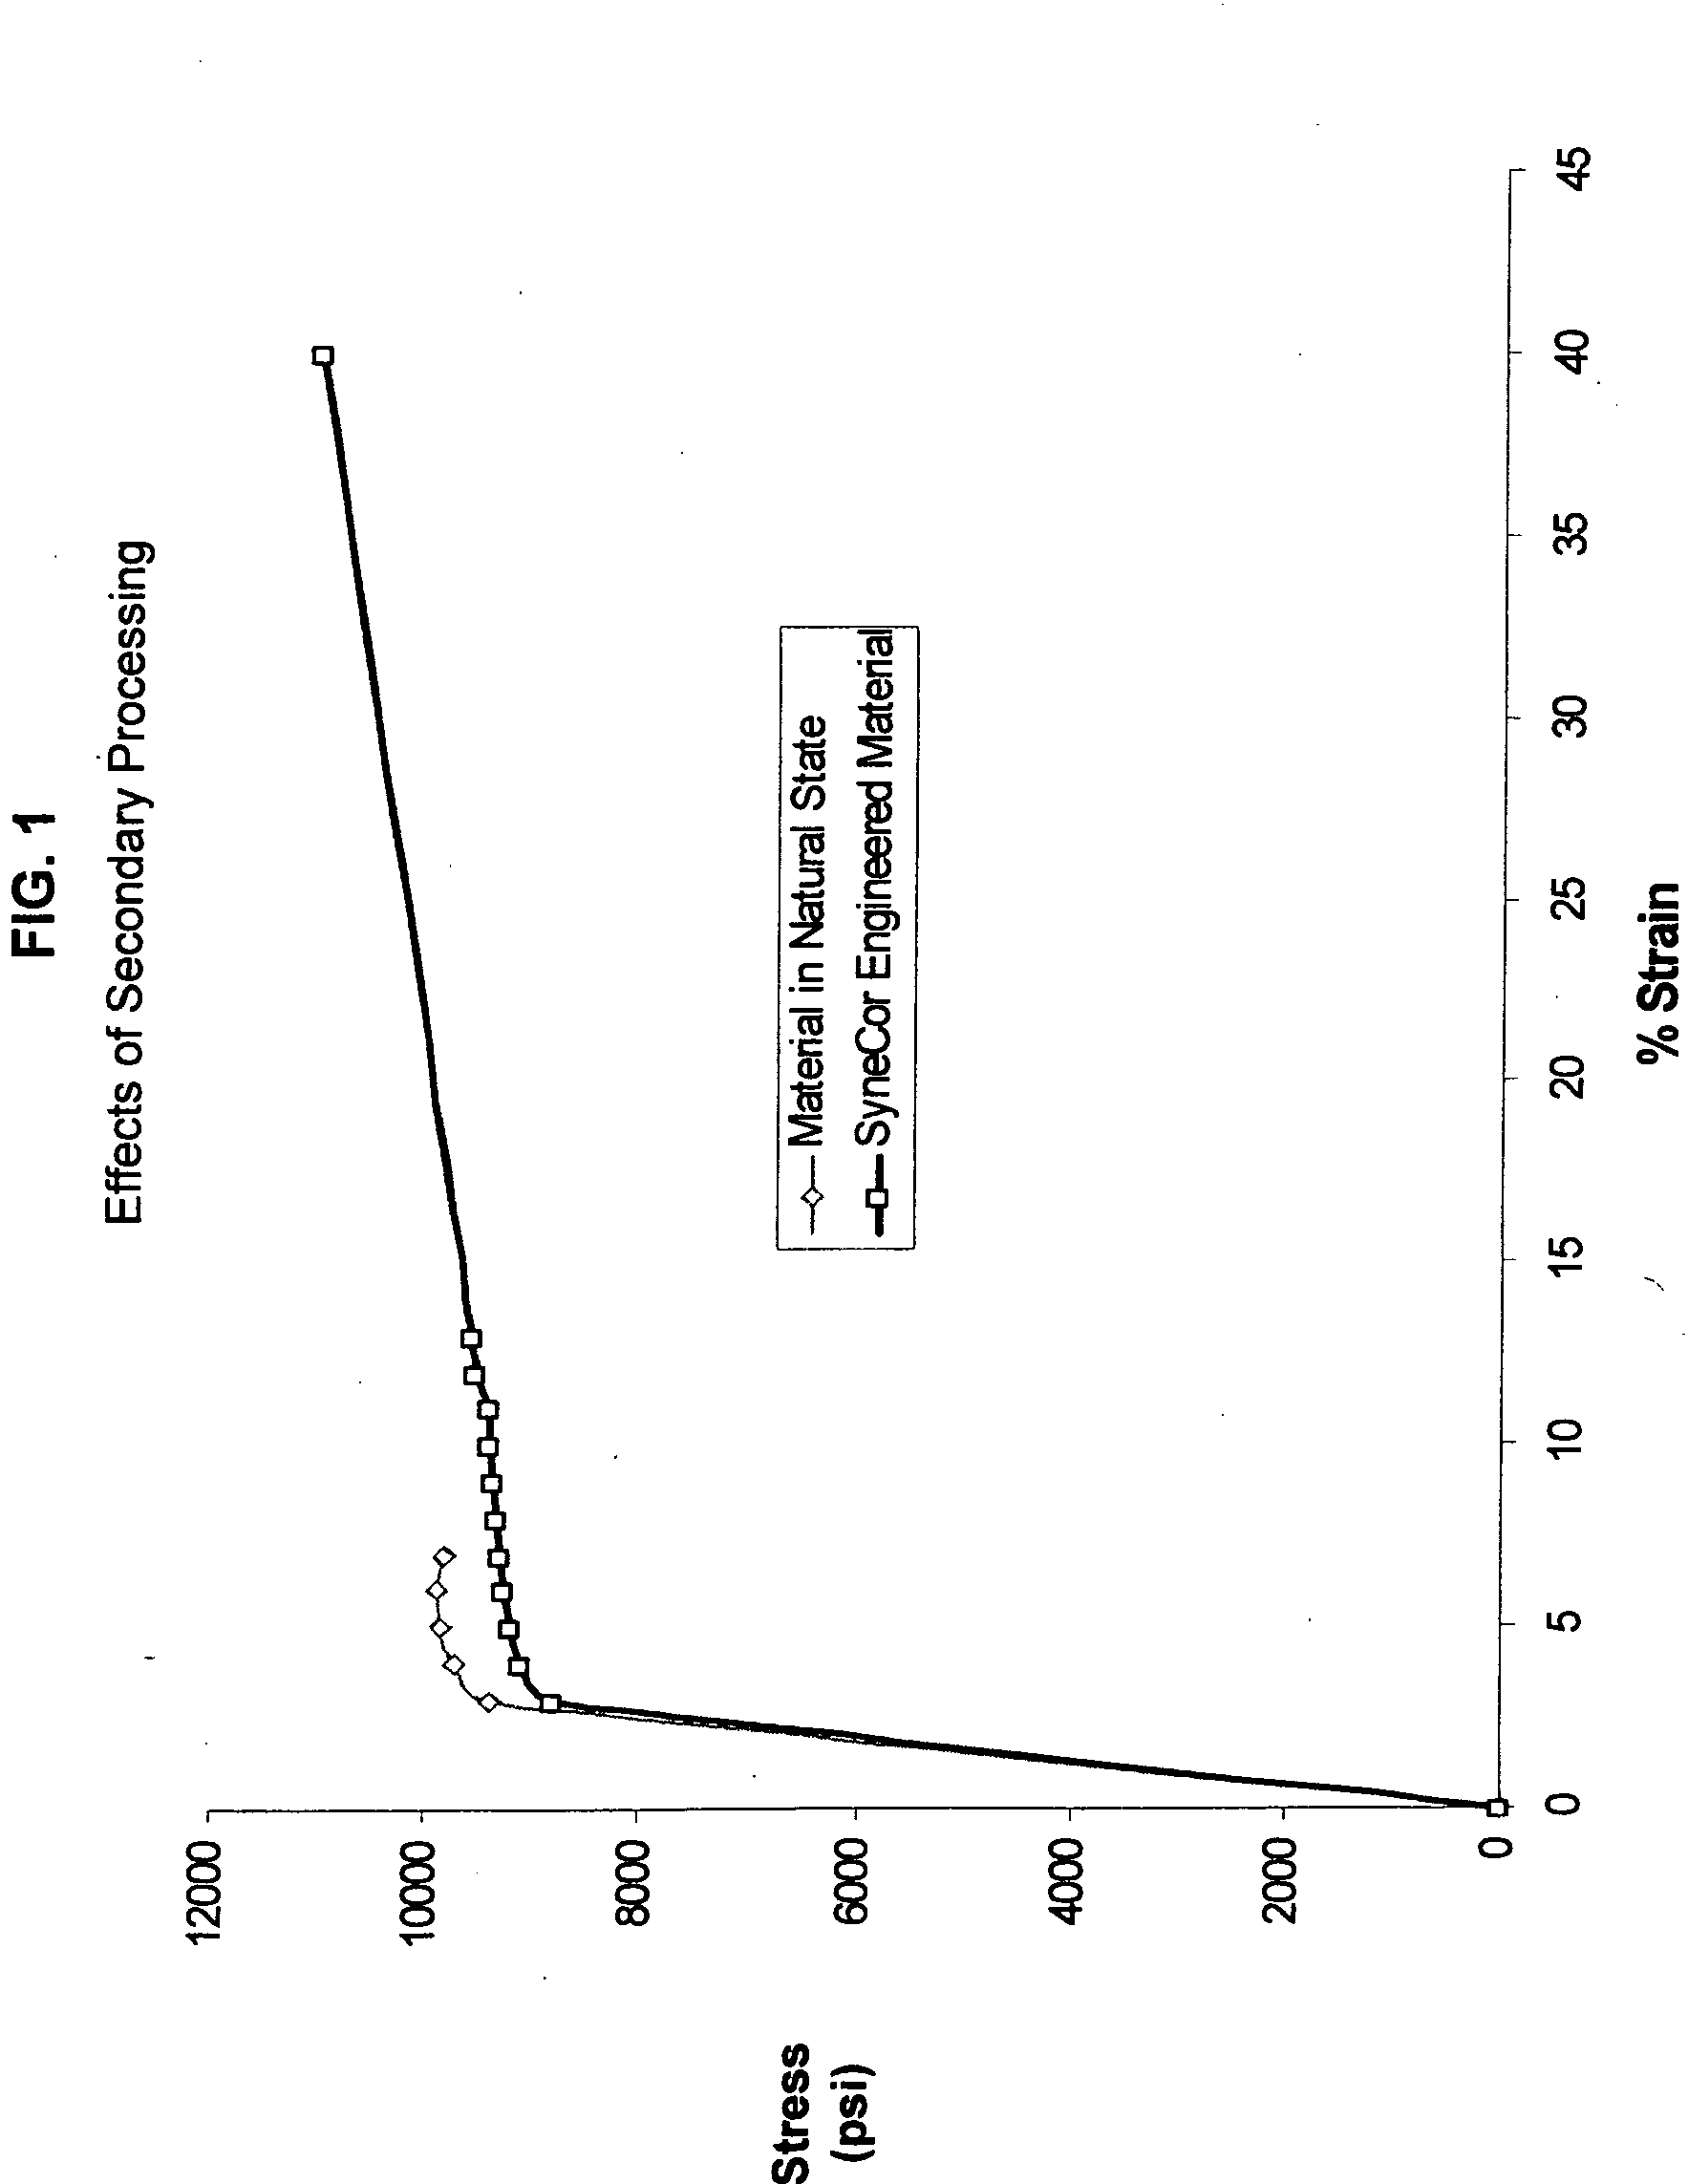 Polymeric endoprostheses with enhanced strength and flexibility and methods of manufacture